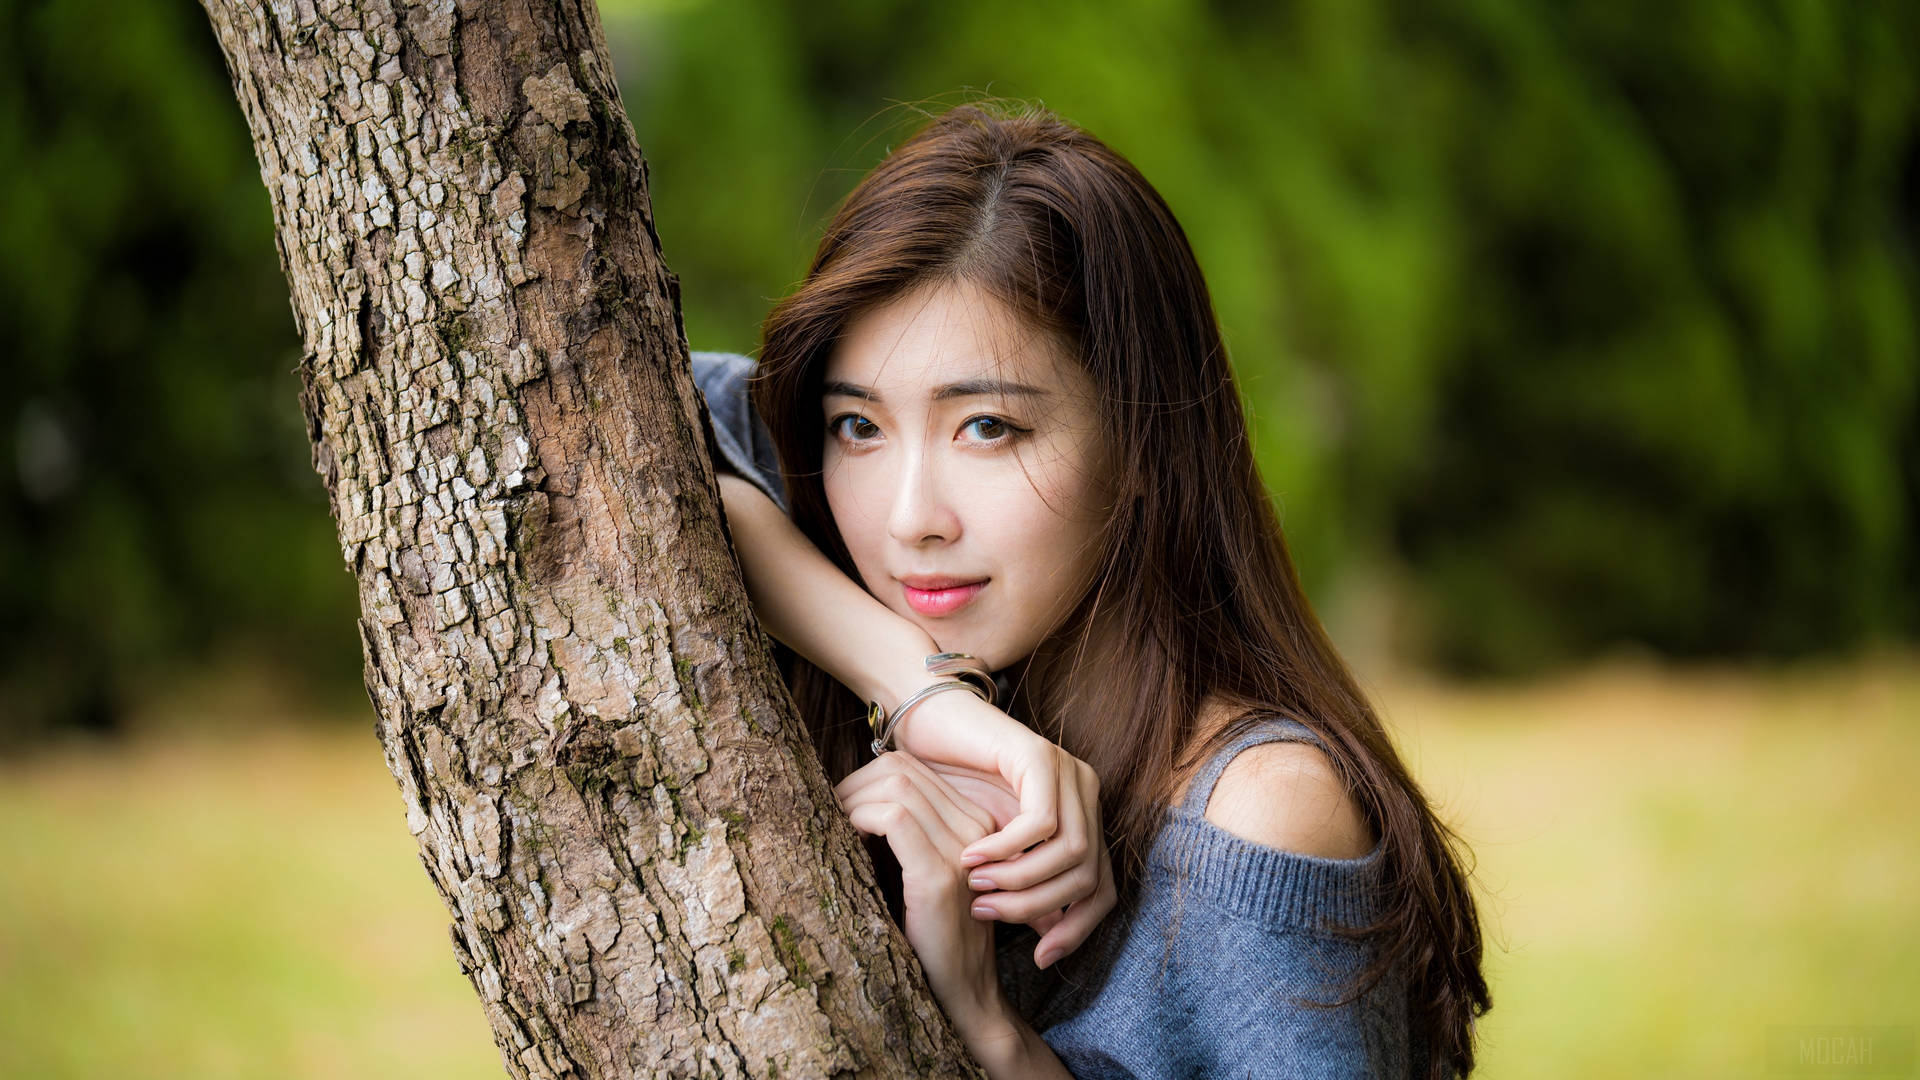 Asian Women Leaning On Tree Trunk Background